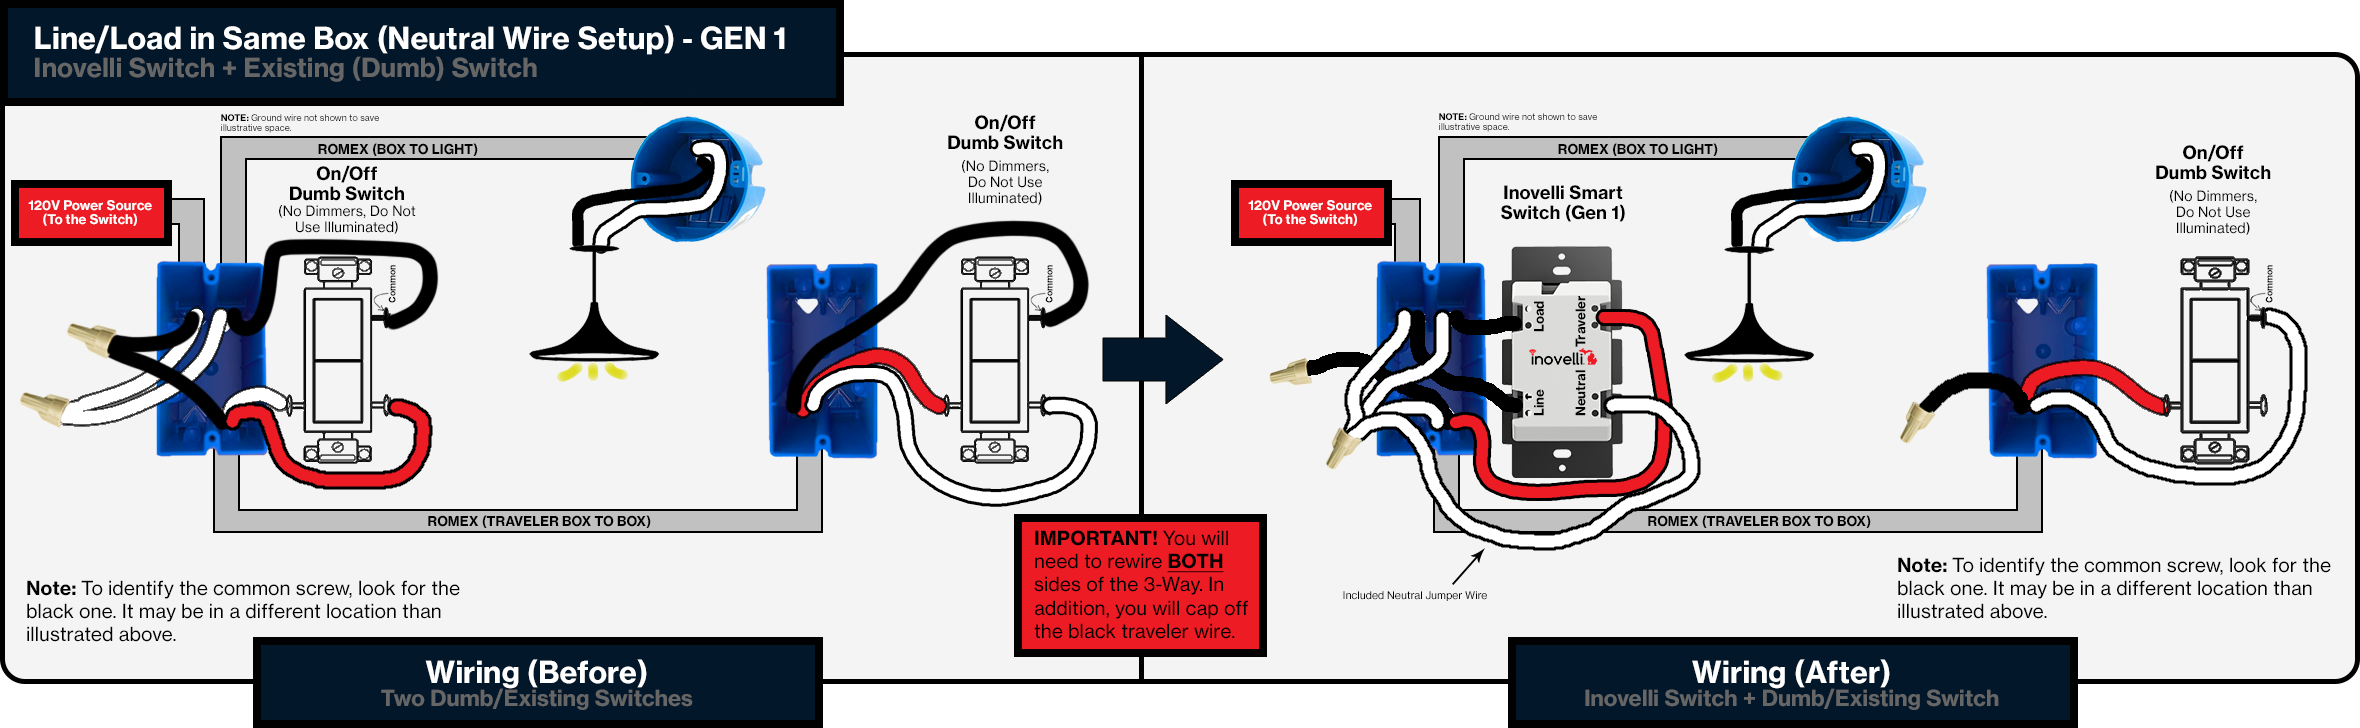 Wiring A Single Pole Dimmer Switch Diagram Wiring Digital and Schematic